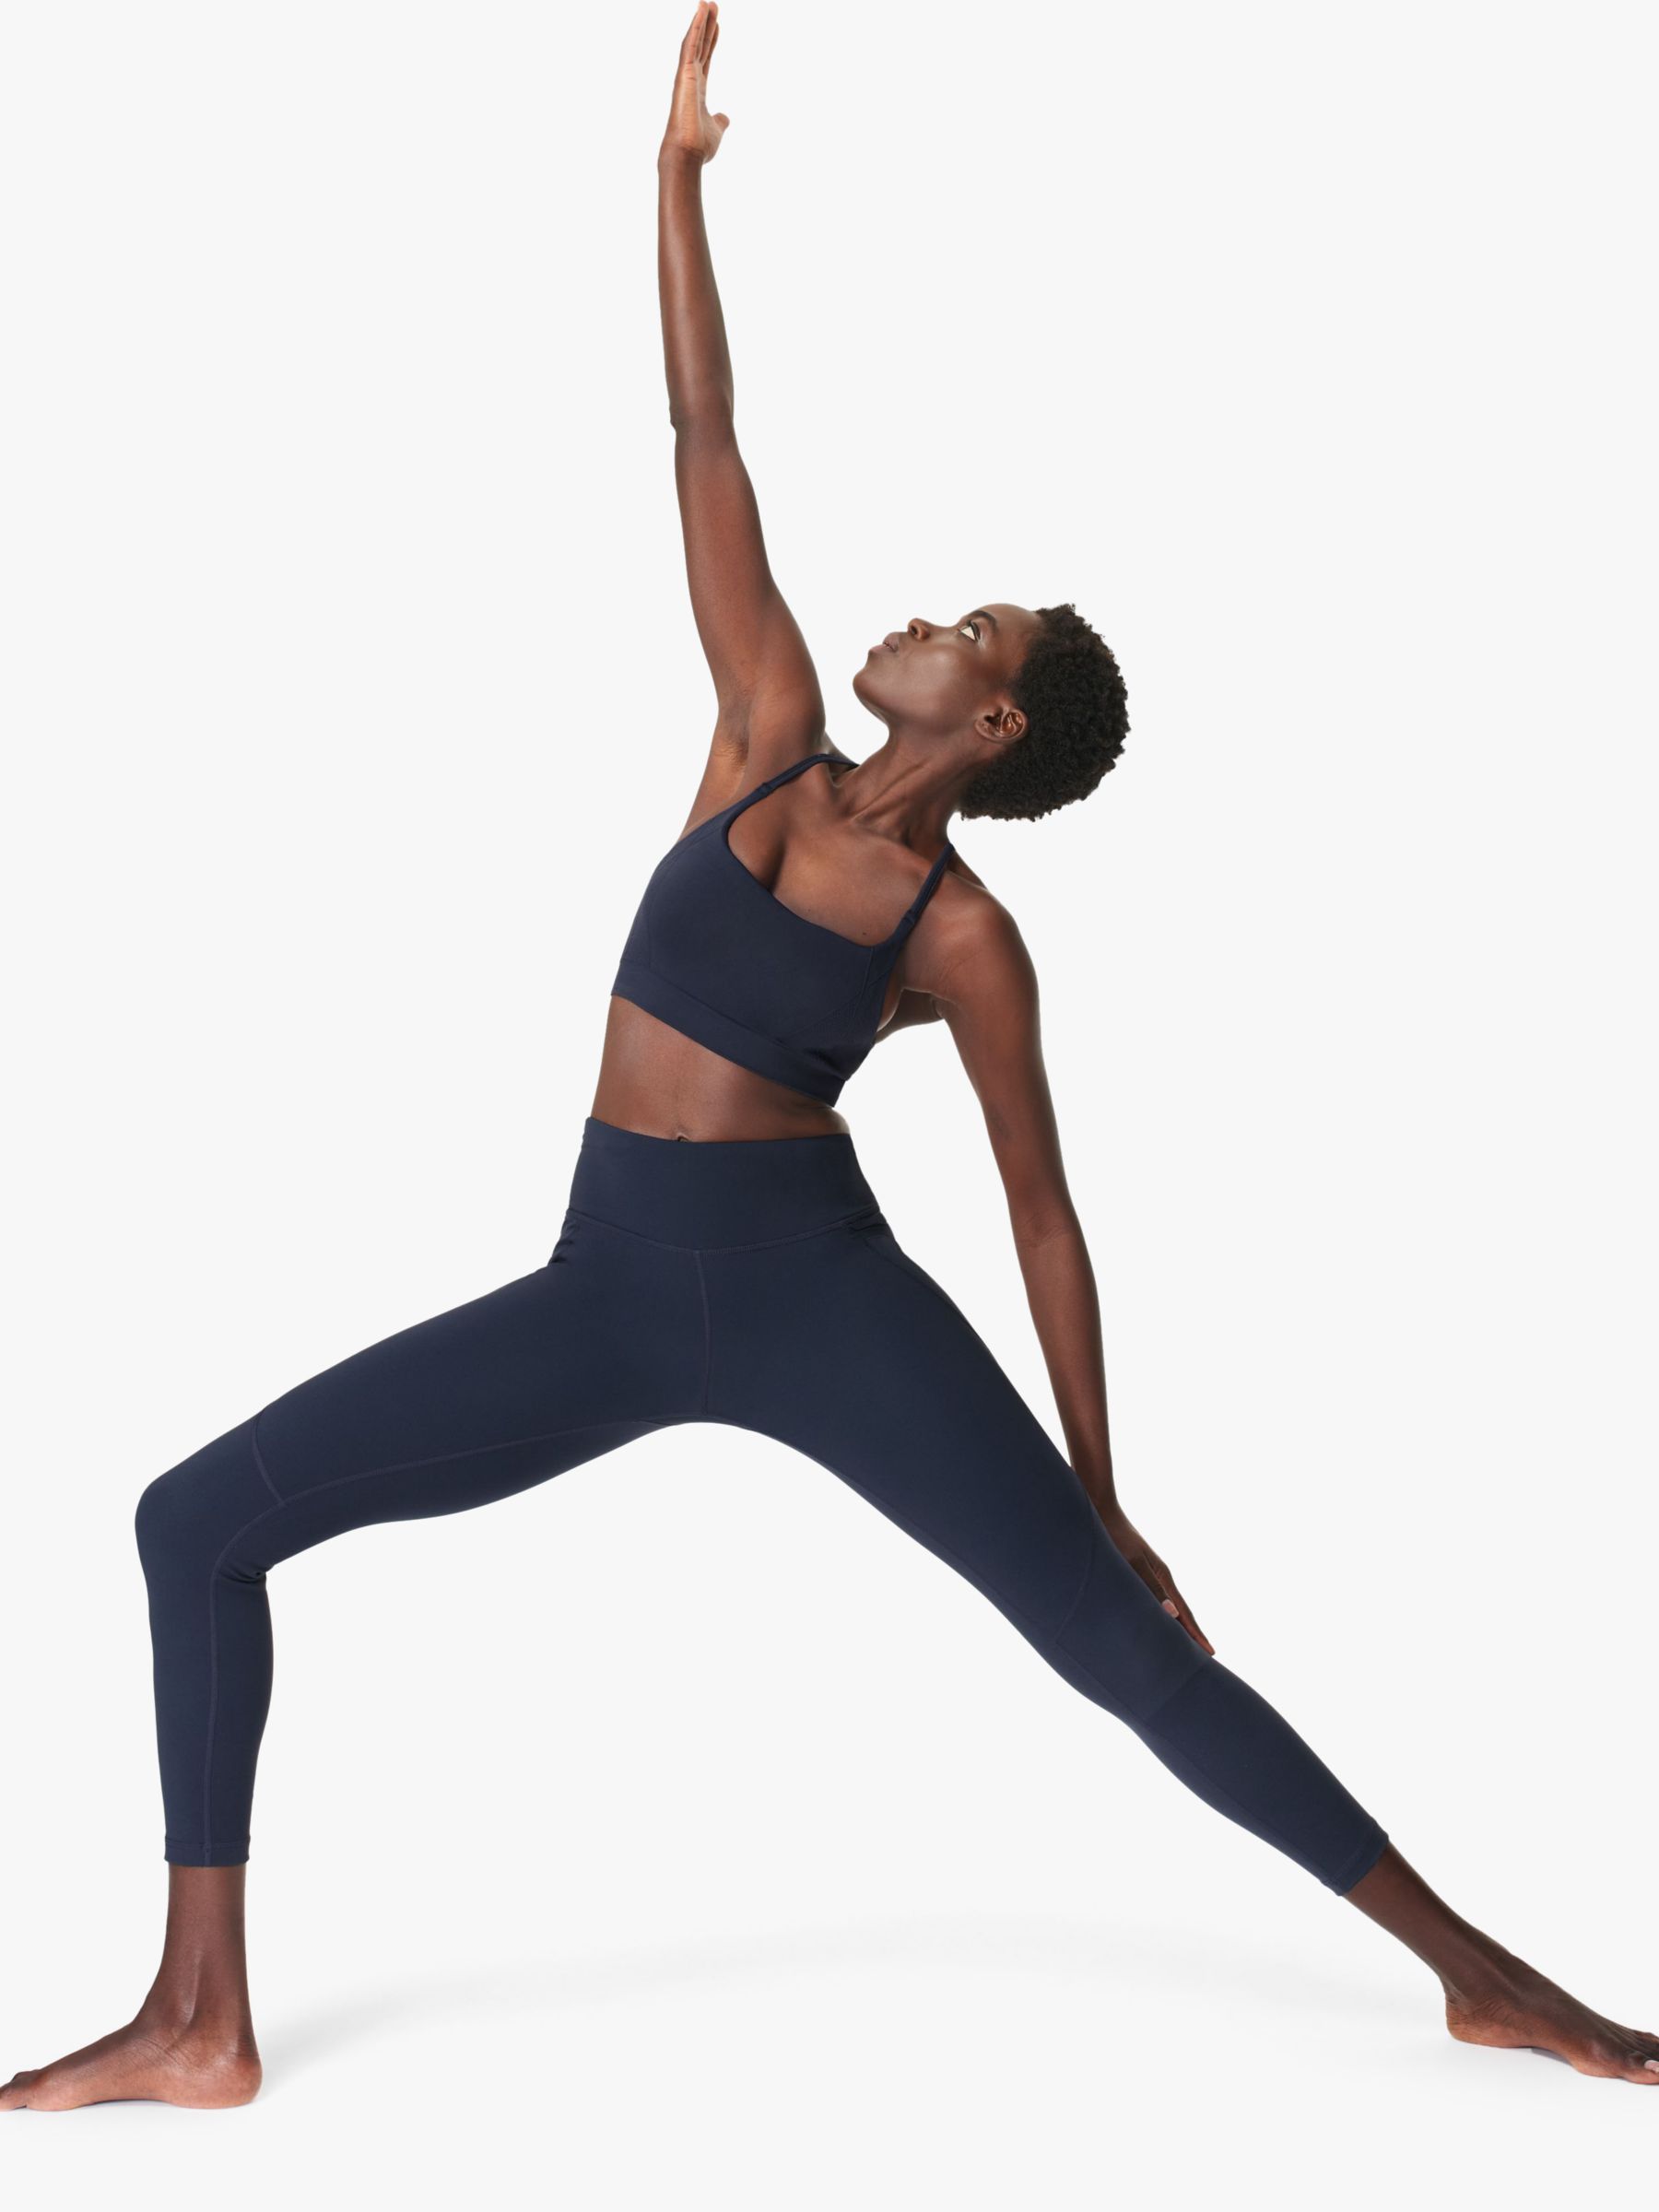 Buy Sweaty Betty Navy Blue 7/8 Length Power Workout Leggings from the Next  UK online shop